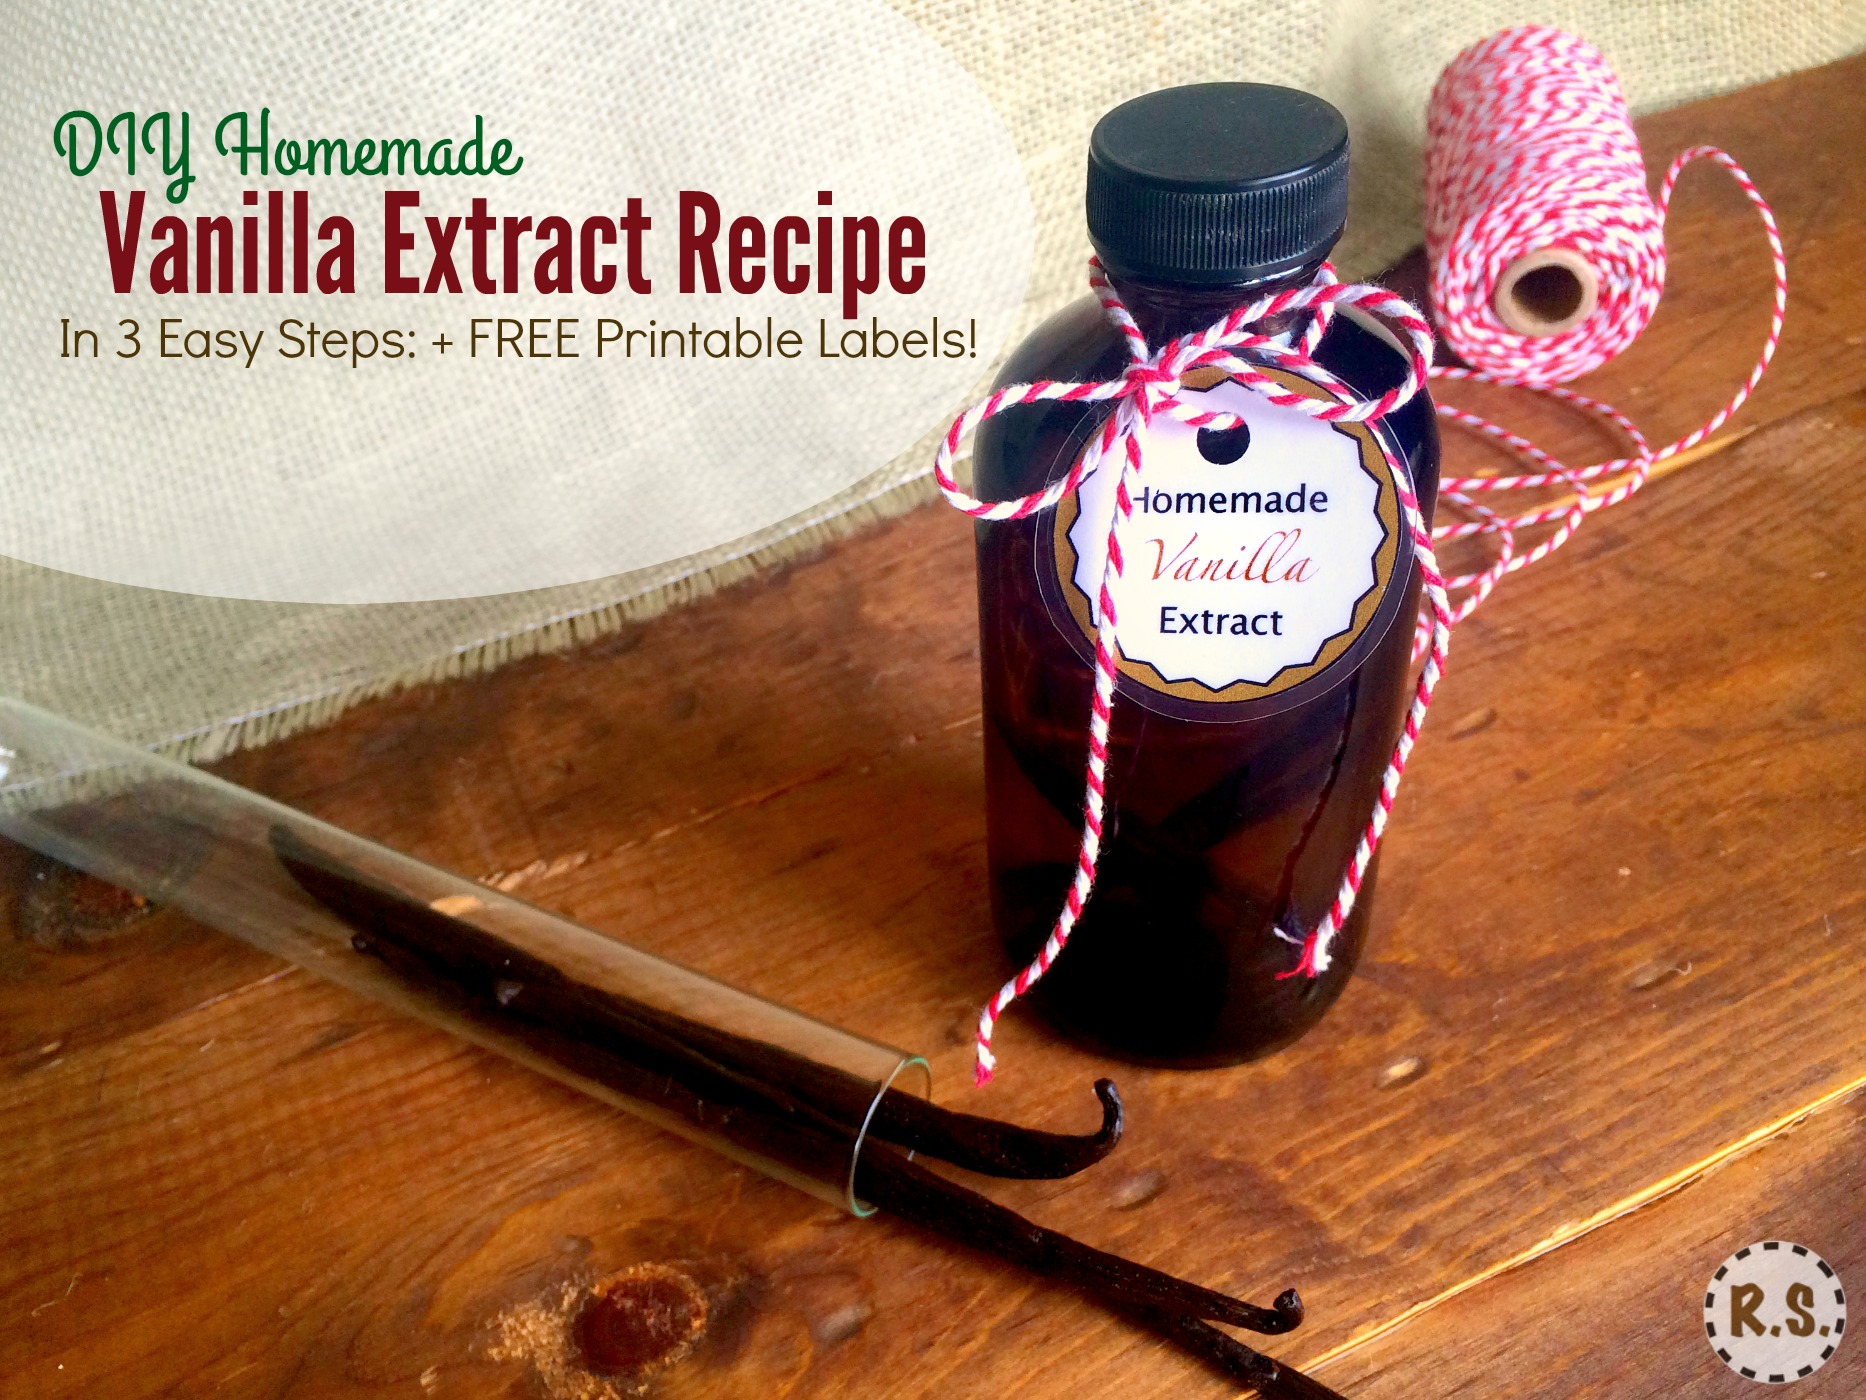 This vanilla extract recipe is easy to make yummy and homemade. An great DIY recipe that will give a delicious hint of vanilla to any batch of cookies. Use this extract in your favorite recipe!